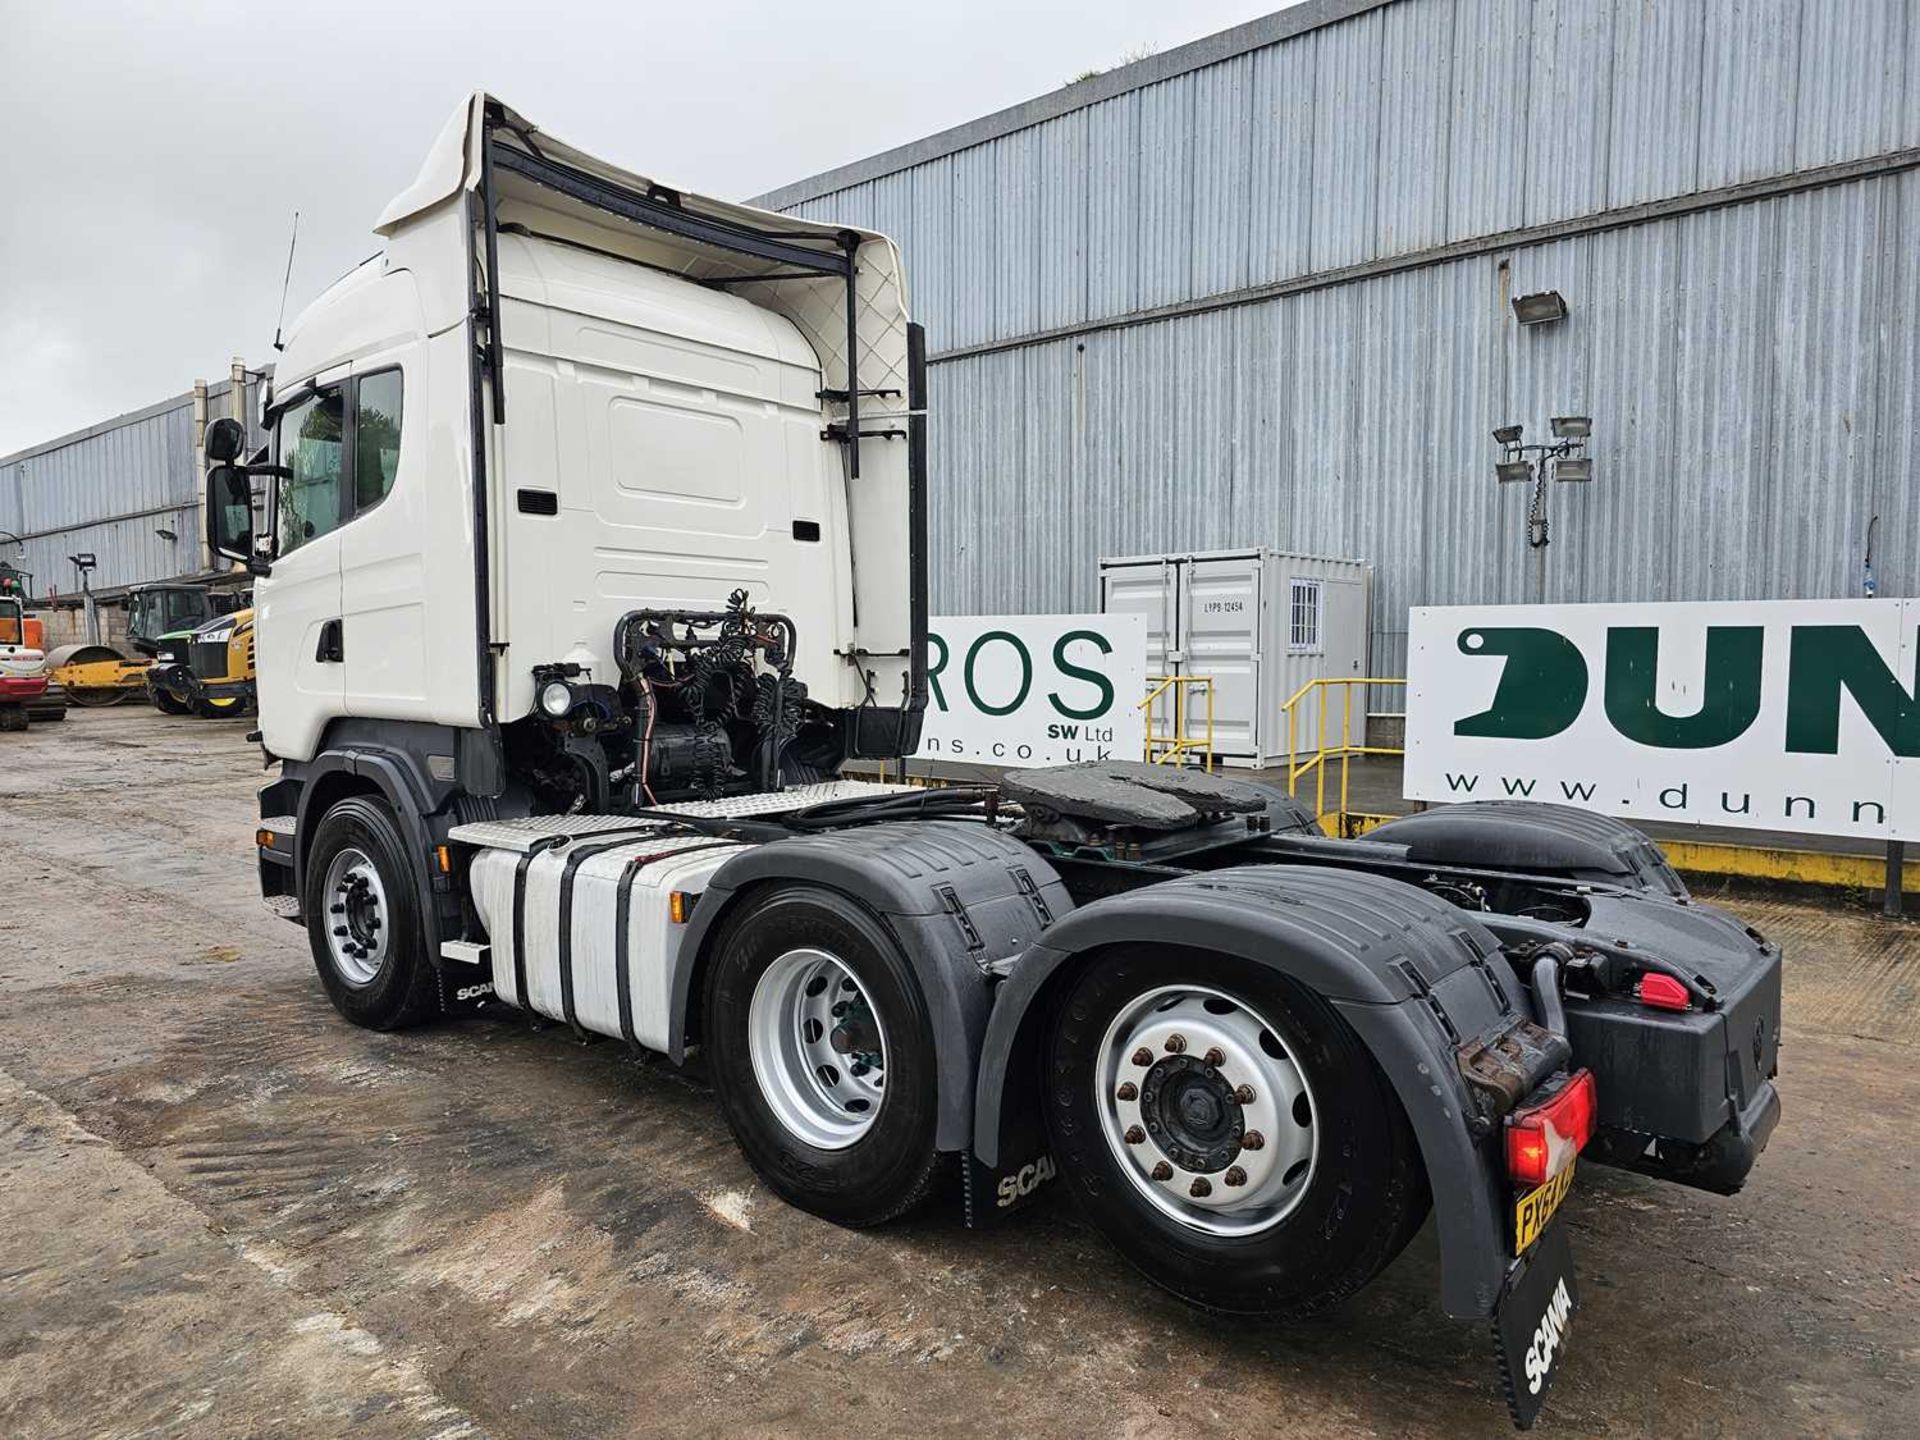 2014 Scania R450 6x2 Rear Lift, Tipping Gear, Blind Spot Camera, A/C, Automatic Gearbox - Image 3 of 22